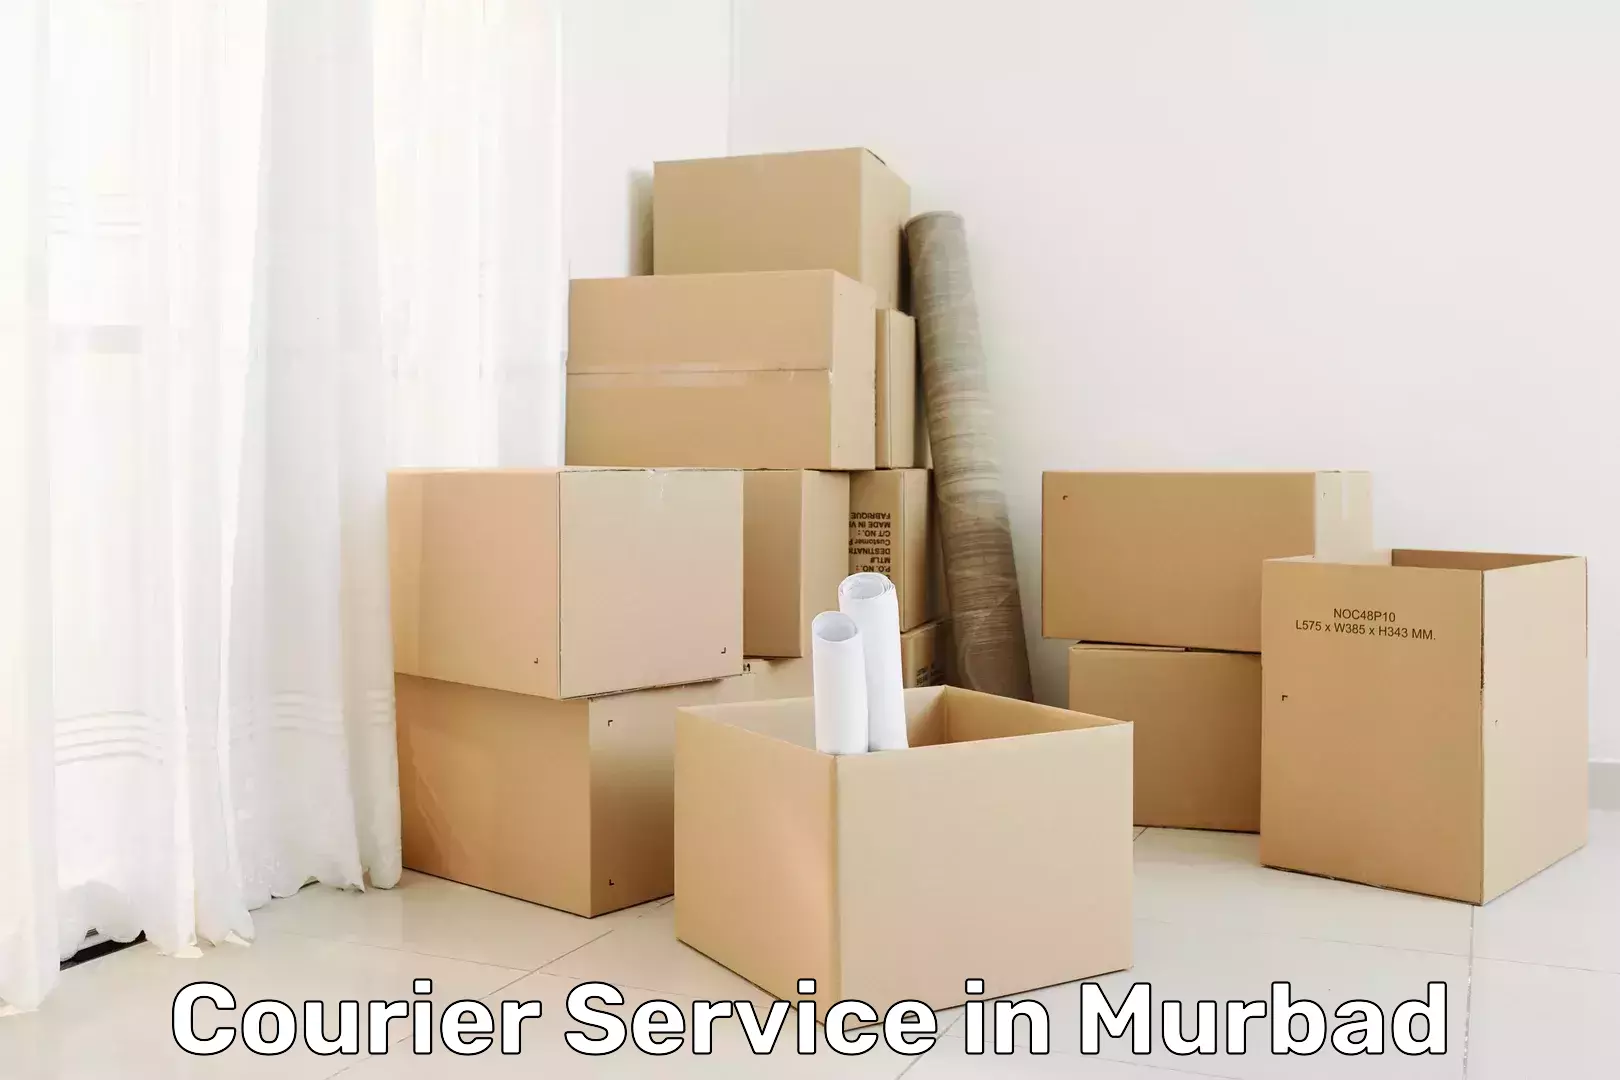 Diverse delivery methods in Murbad